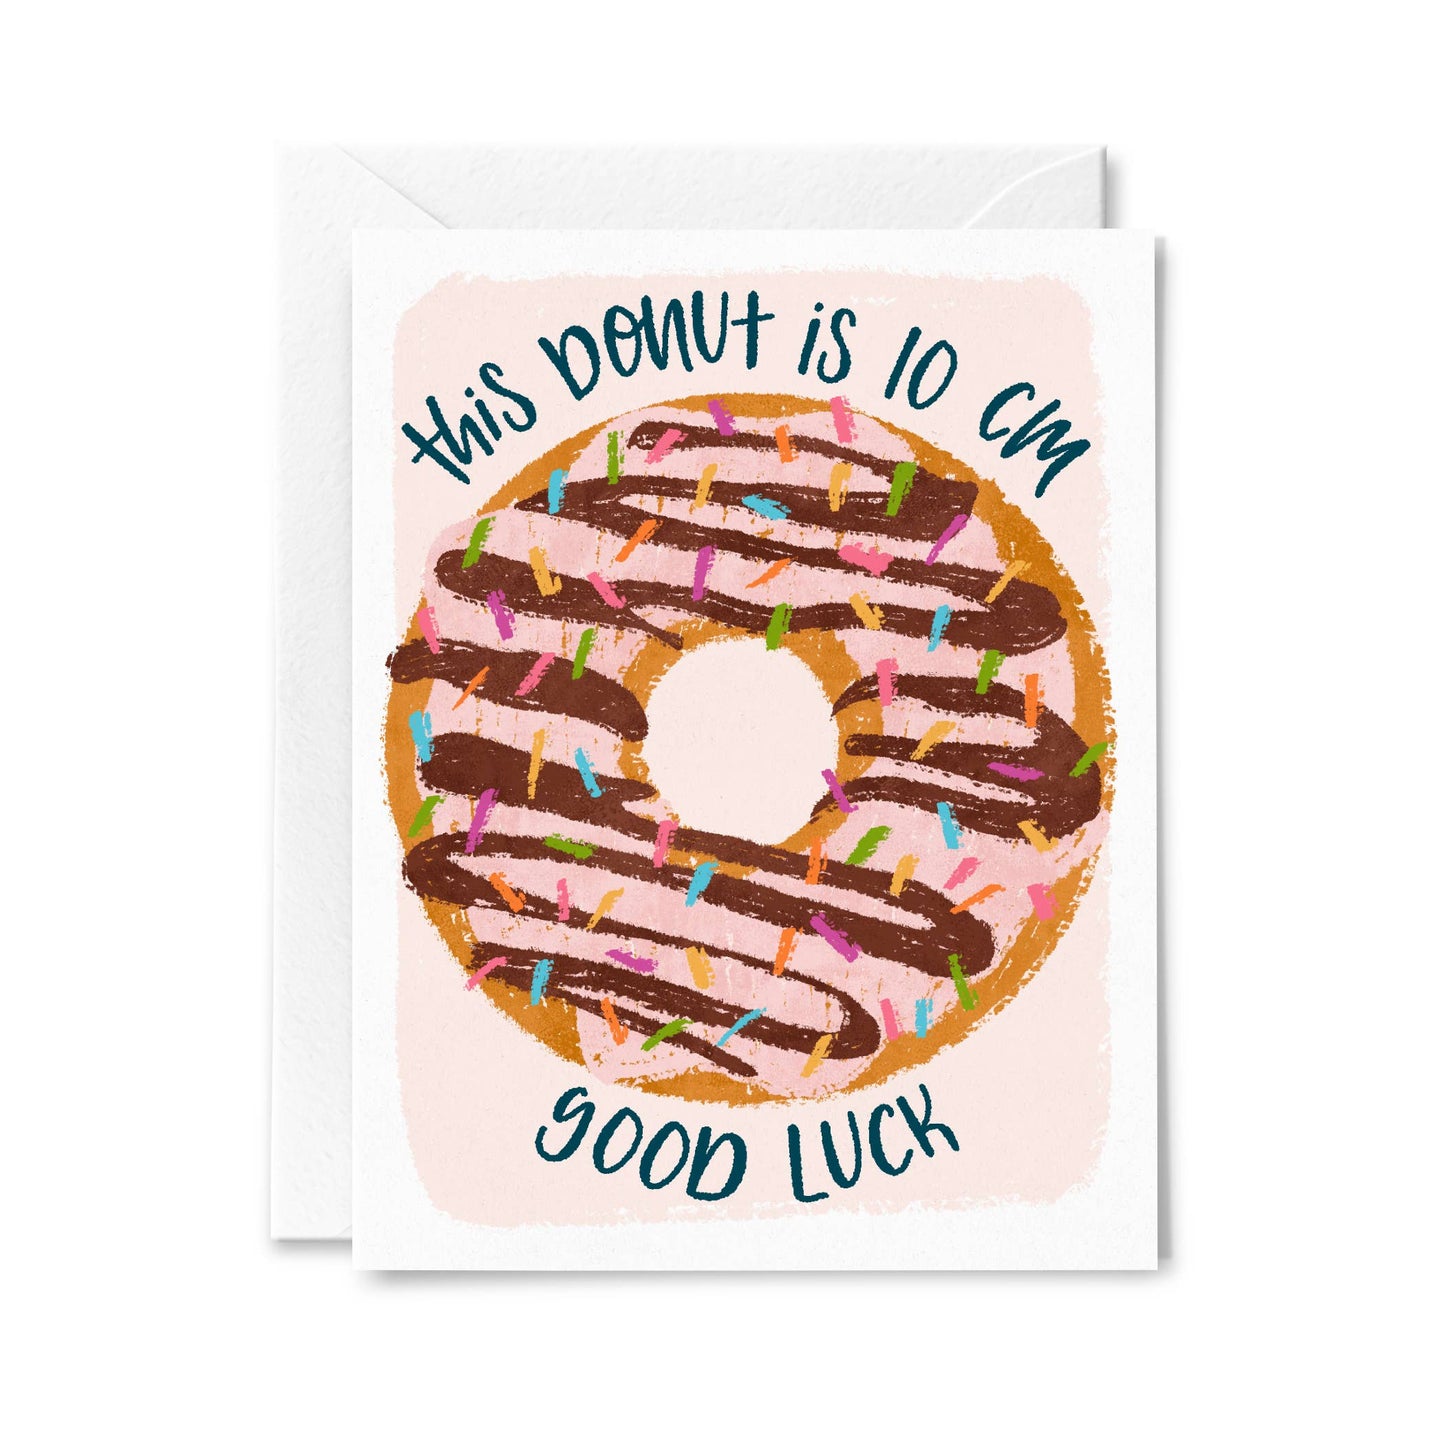 This Donut is 10 CM Funny Baby Card